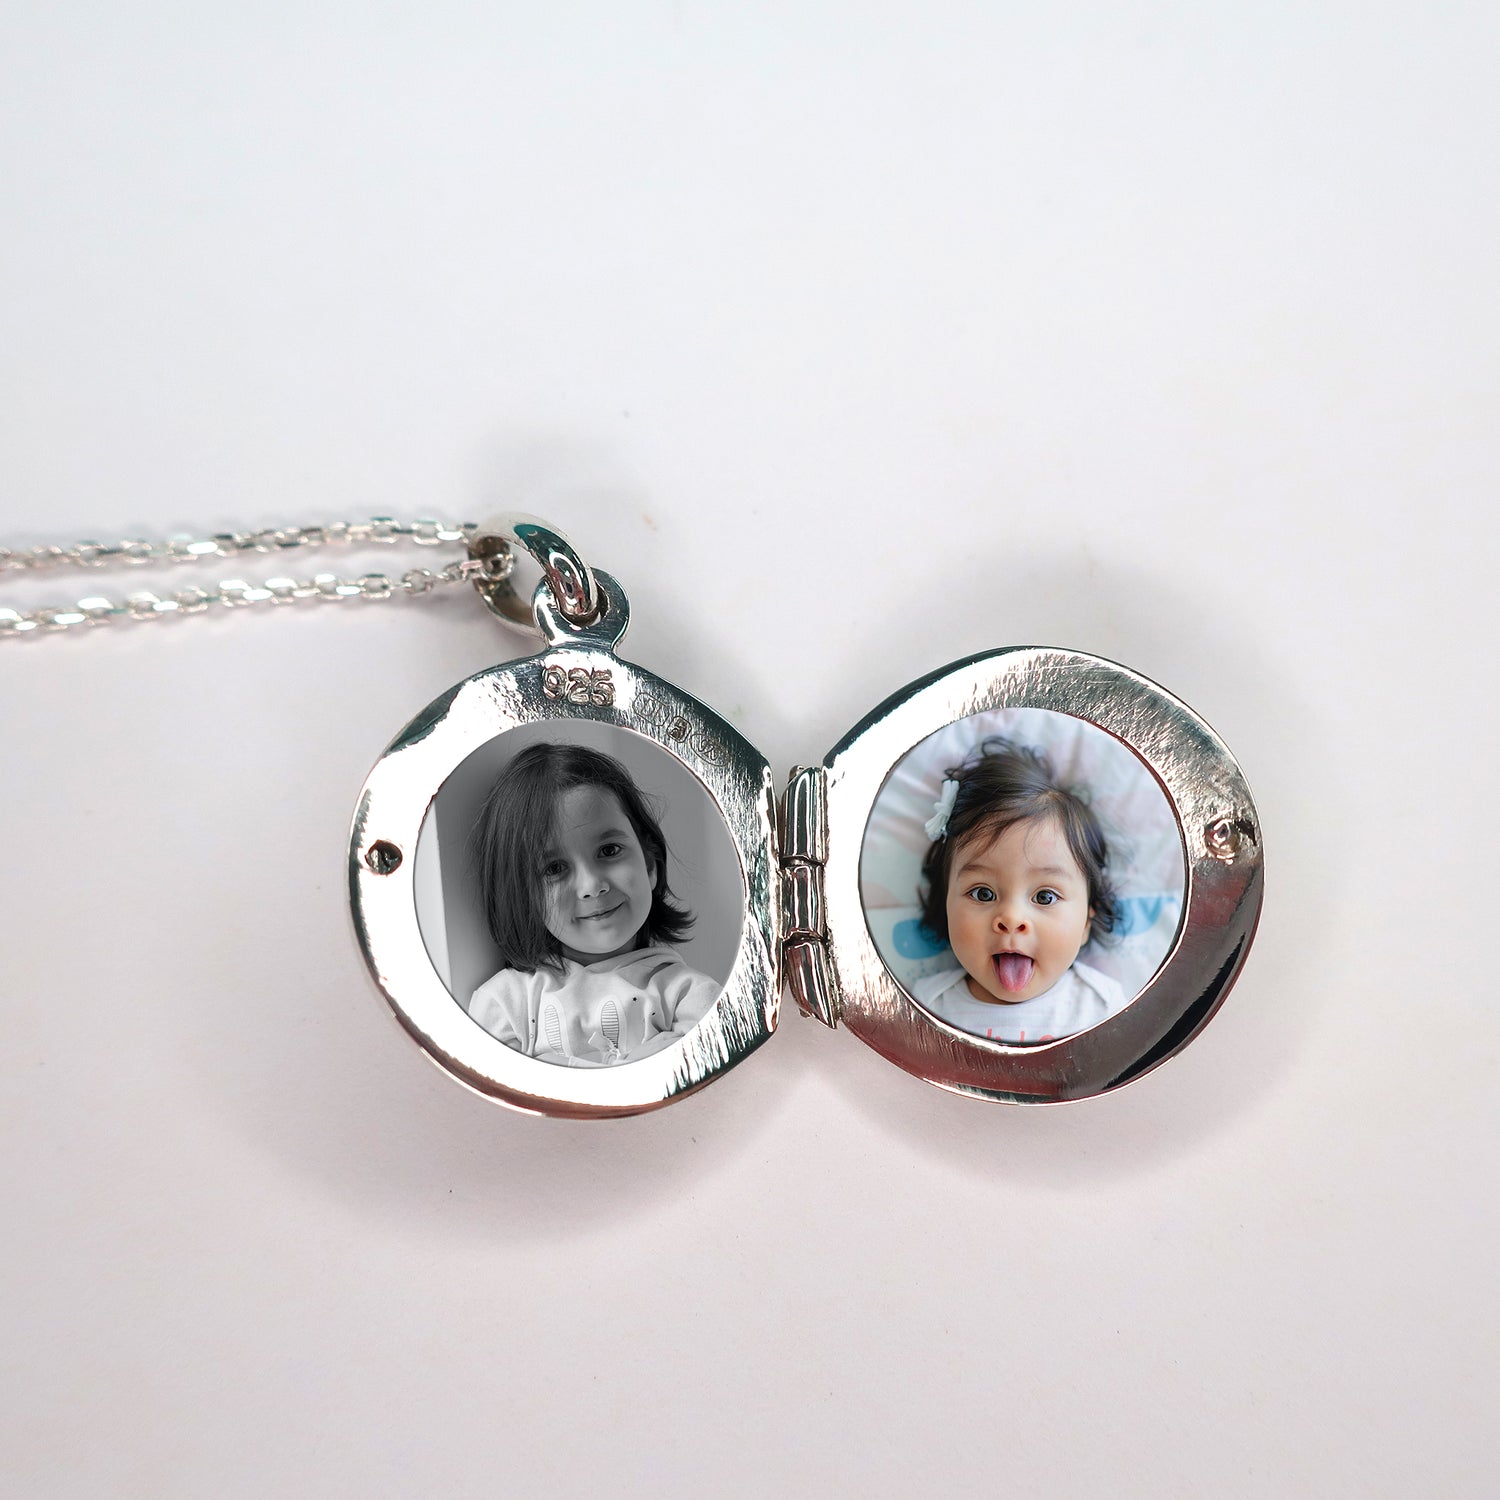 round photo locket open revealing two photos of children against a pink background